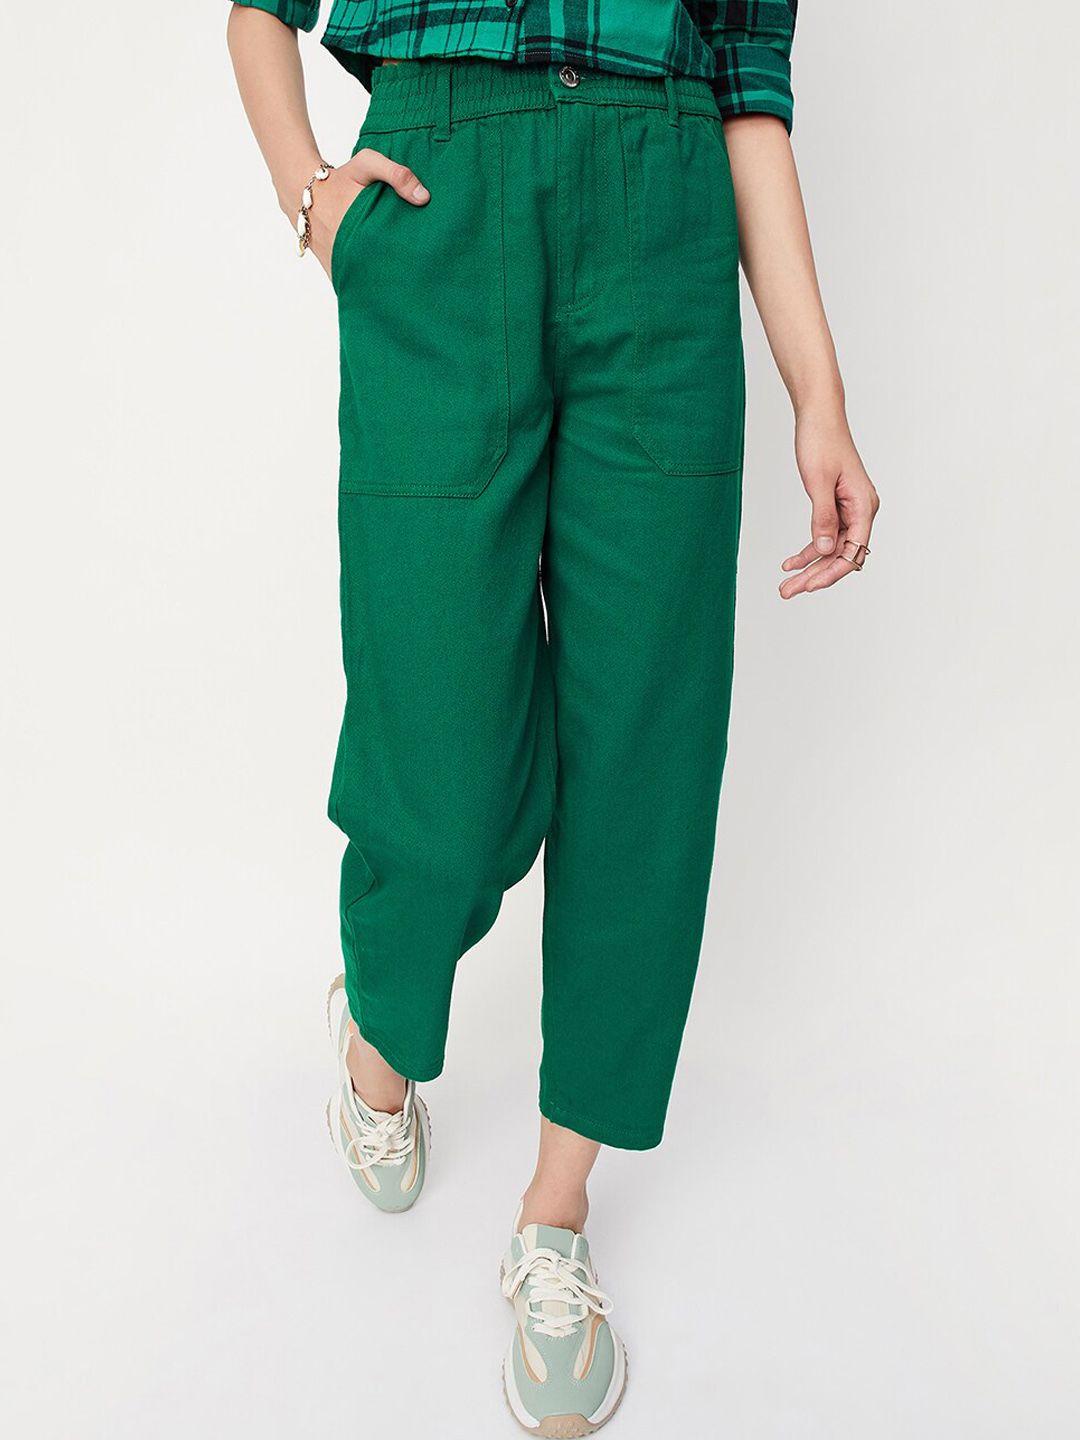 max-women-mid-rise-pure-cotton-trousers